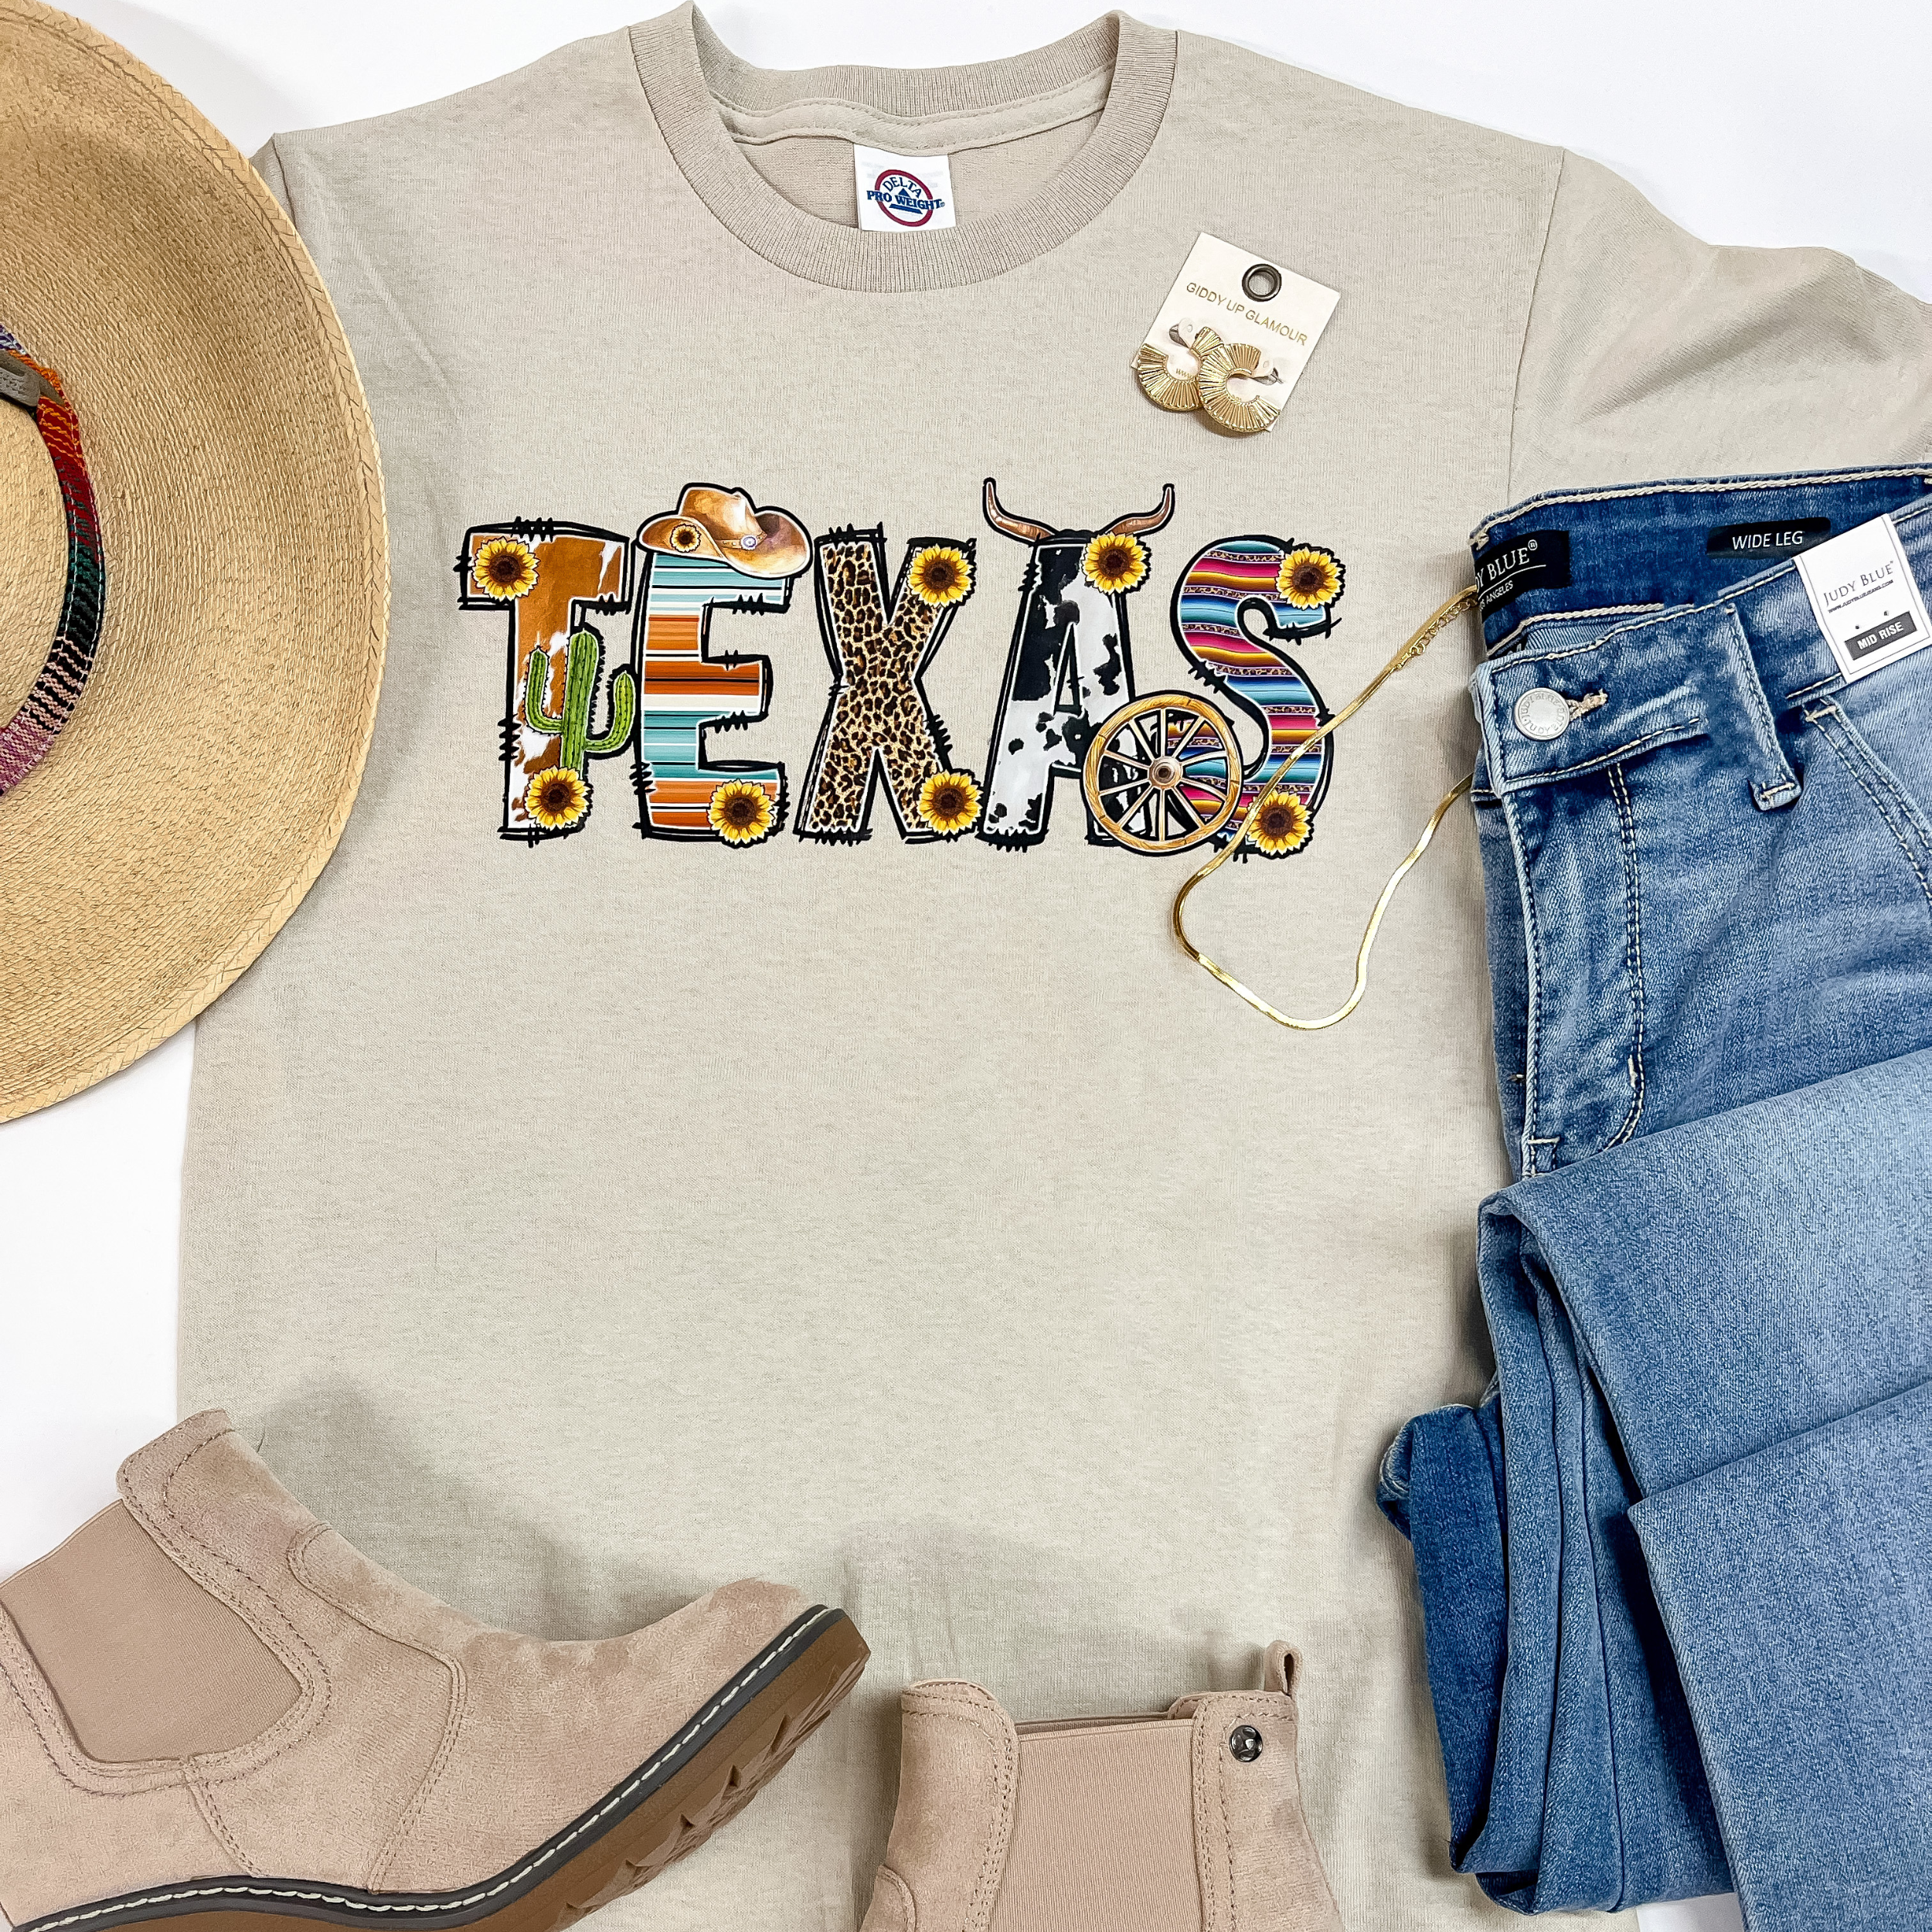 A beige tee with "Texas" written in block letters in the middle. The prints inside "Texas" are, but not limited to: Cowhide, serape, leopard. On the left of the tee is a straw Charlie 1 Horse hat and brown booties. To the right is a pair of blue jeans, gold hoop earrings, and a gold necklace